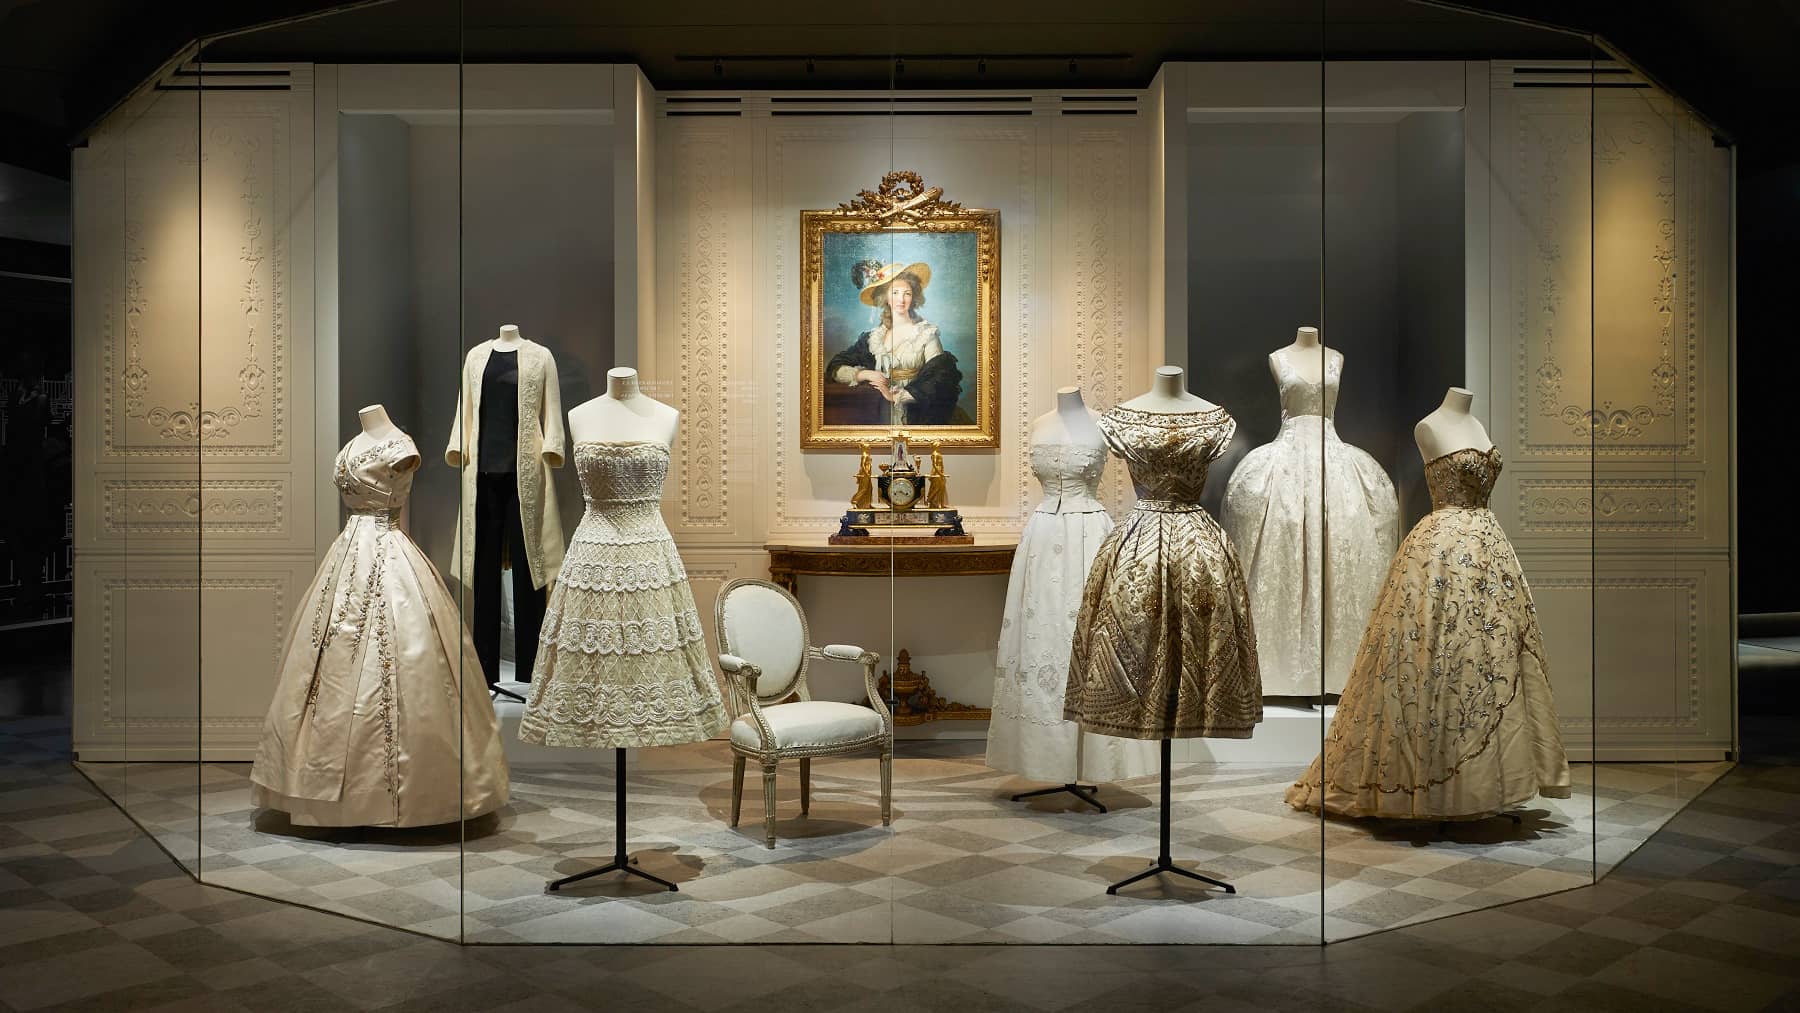 London's Victoria and Albert Museum gears up to stage Dior